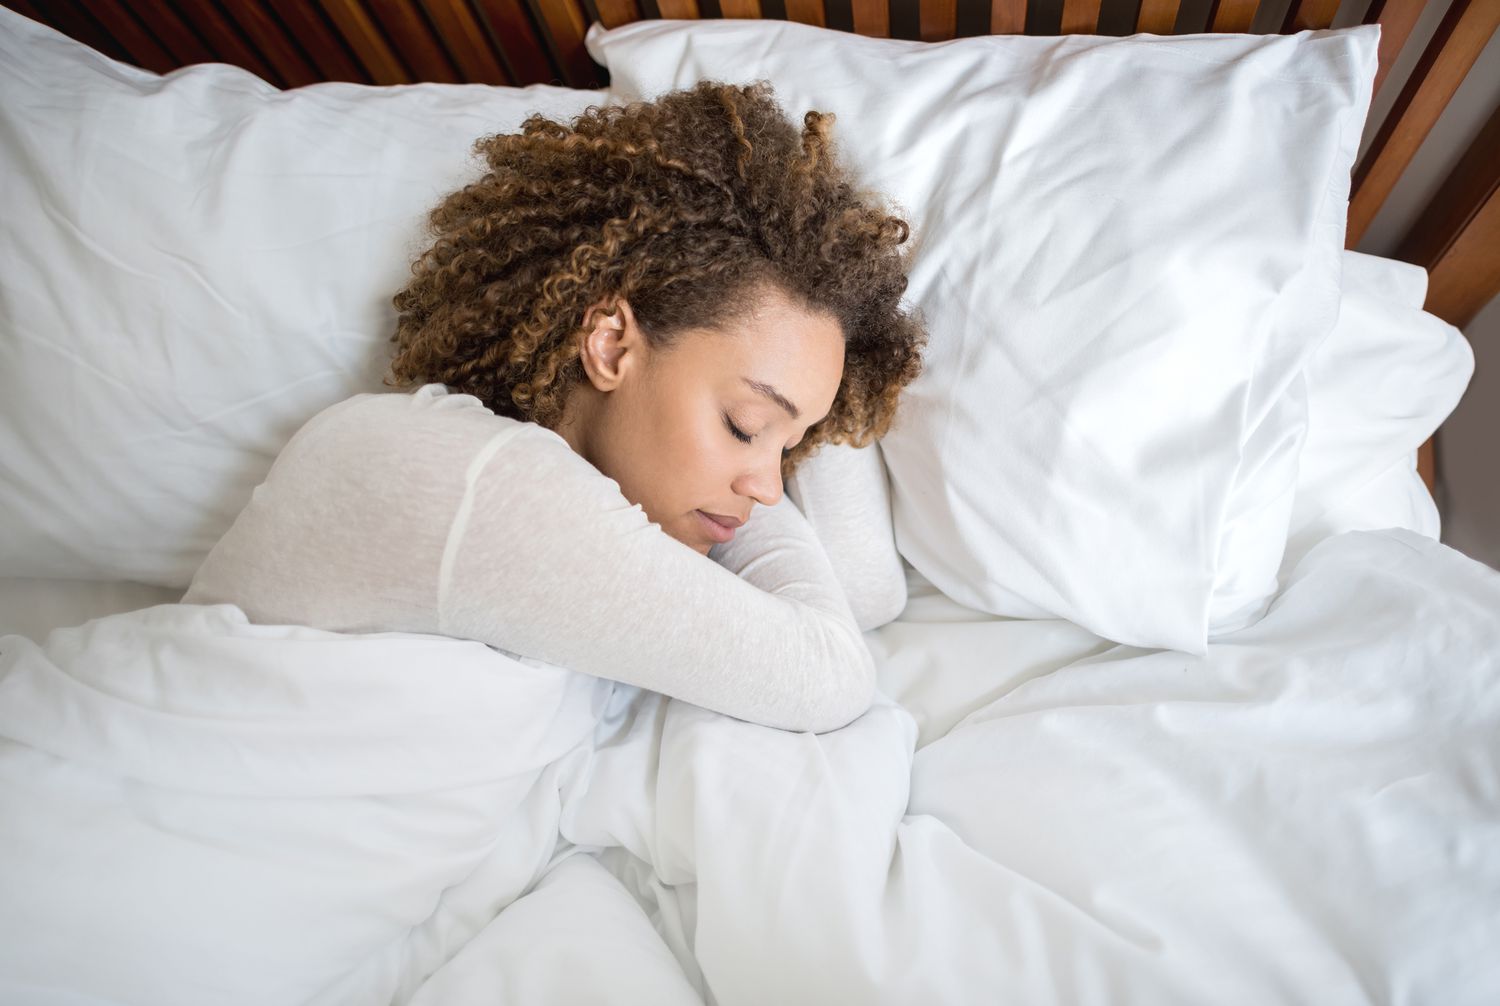 How to Stick to Your Sleep Routine While Self-Isolating | Martha Stewart